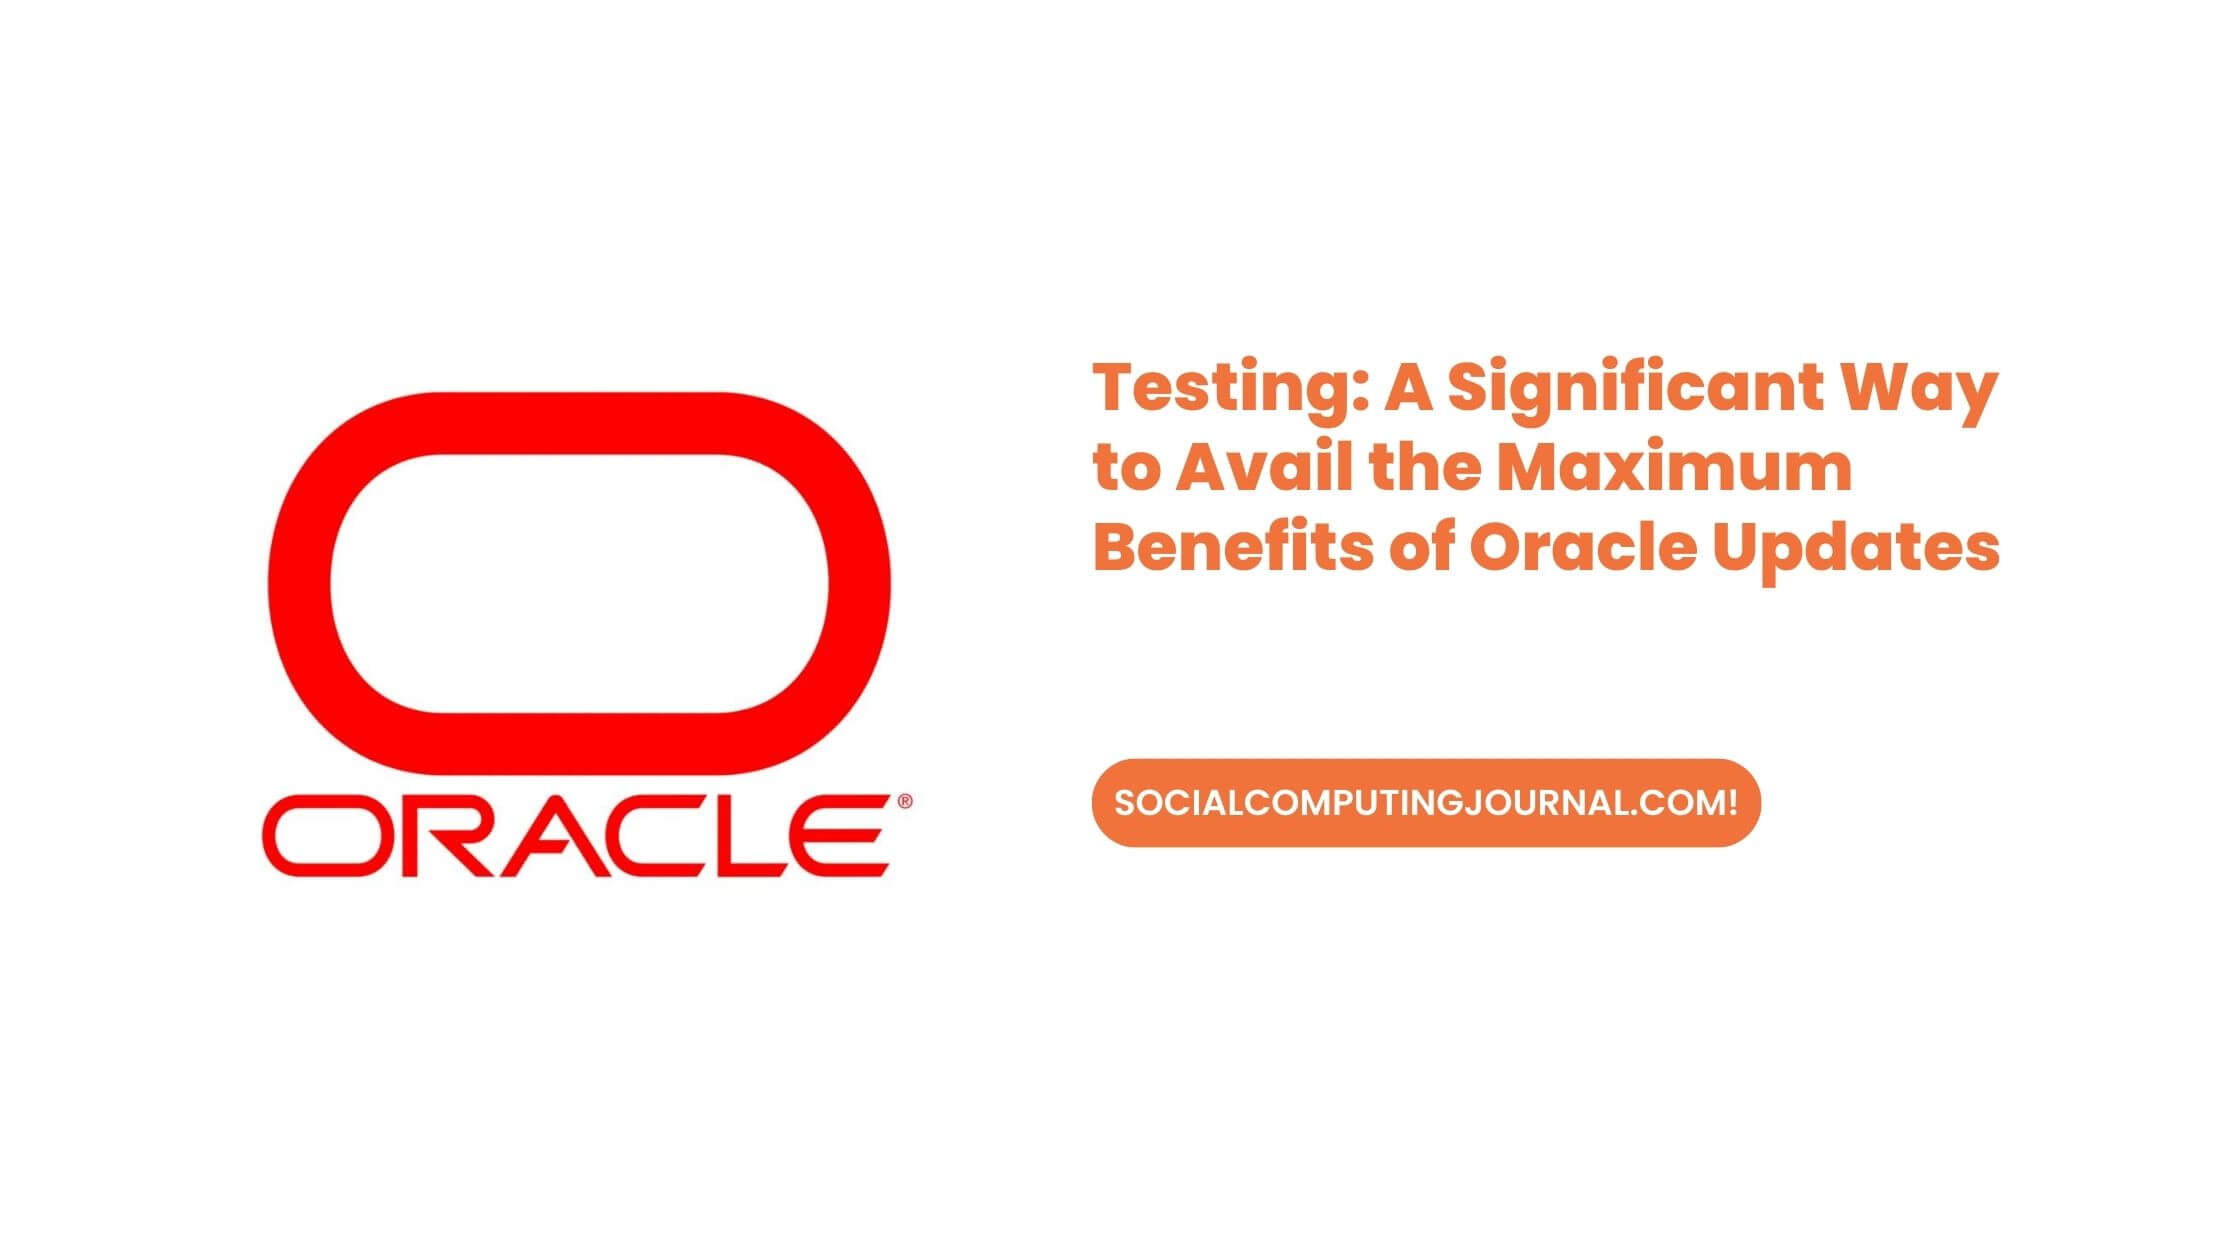 Testing A Significant Way to Avail the Maximum Benefits of Oracle Updates